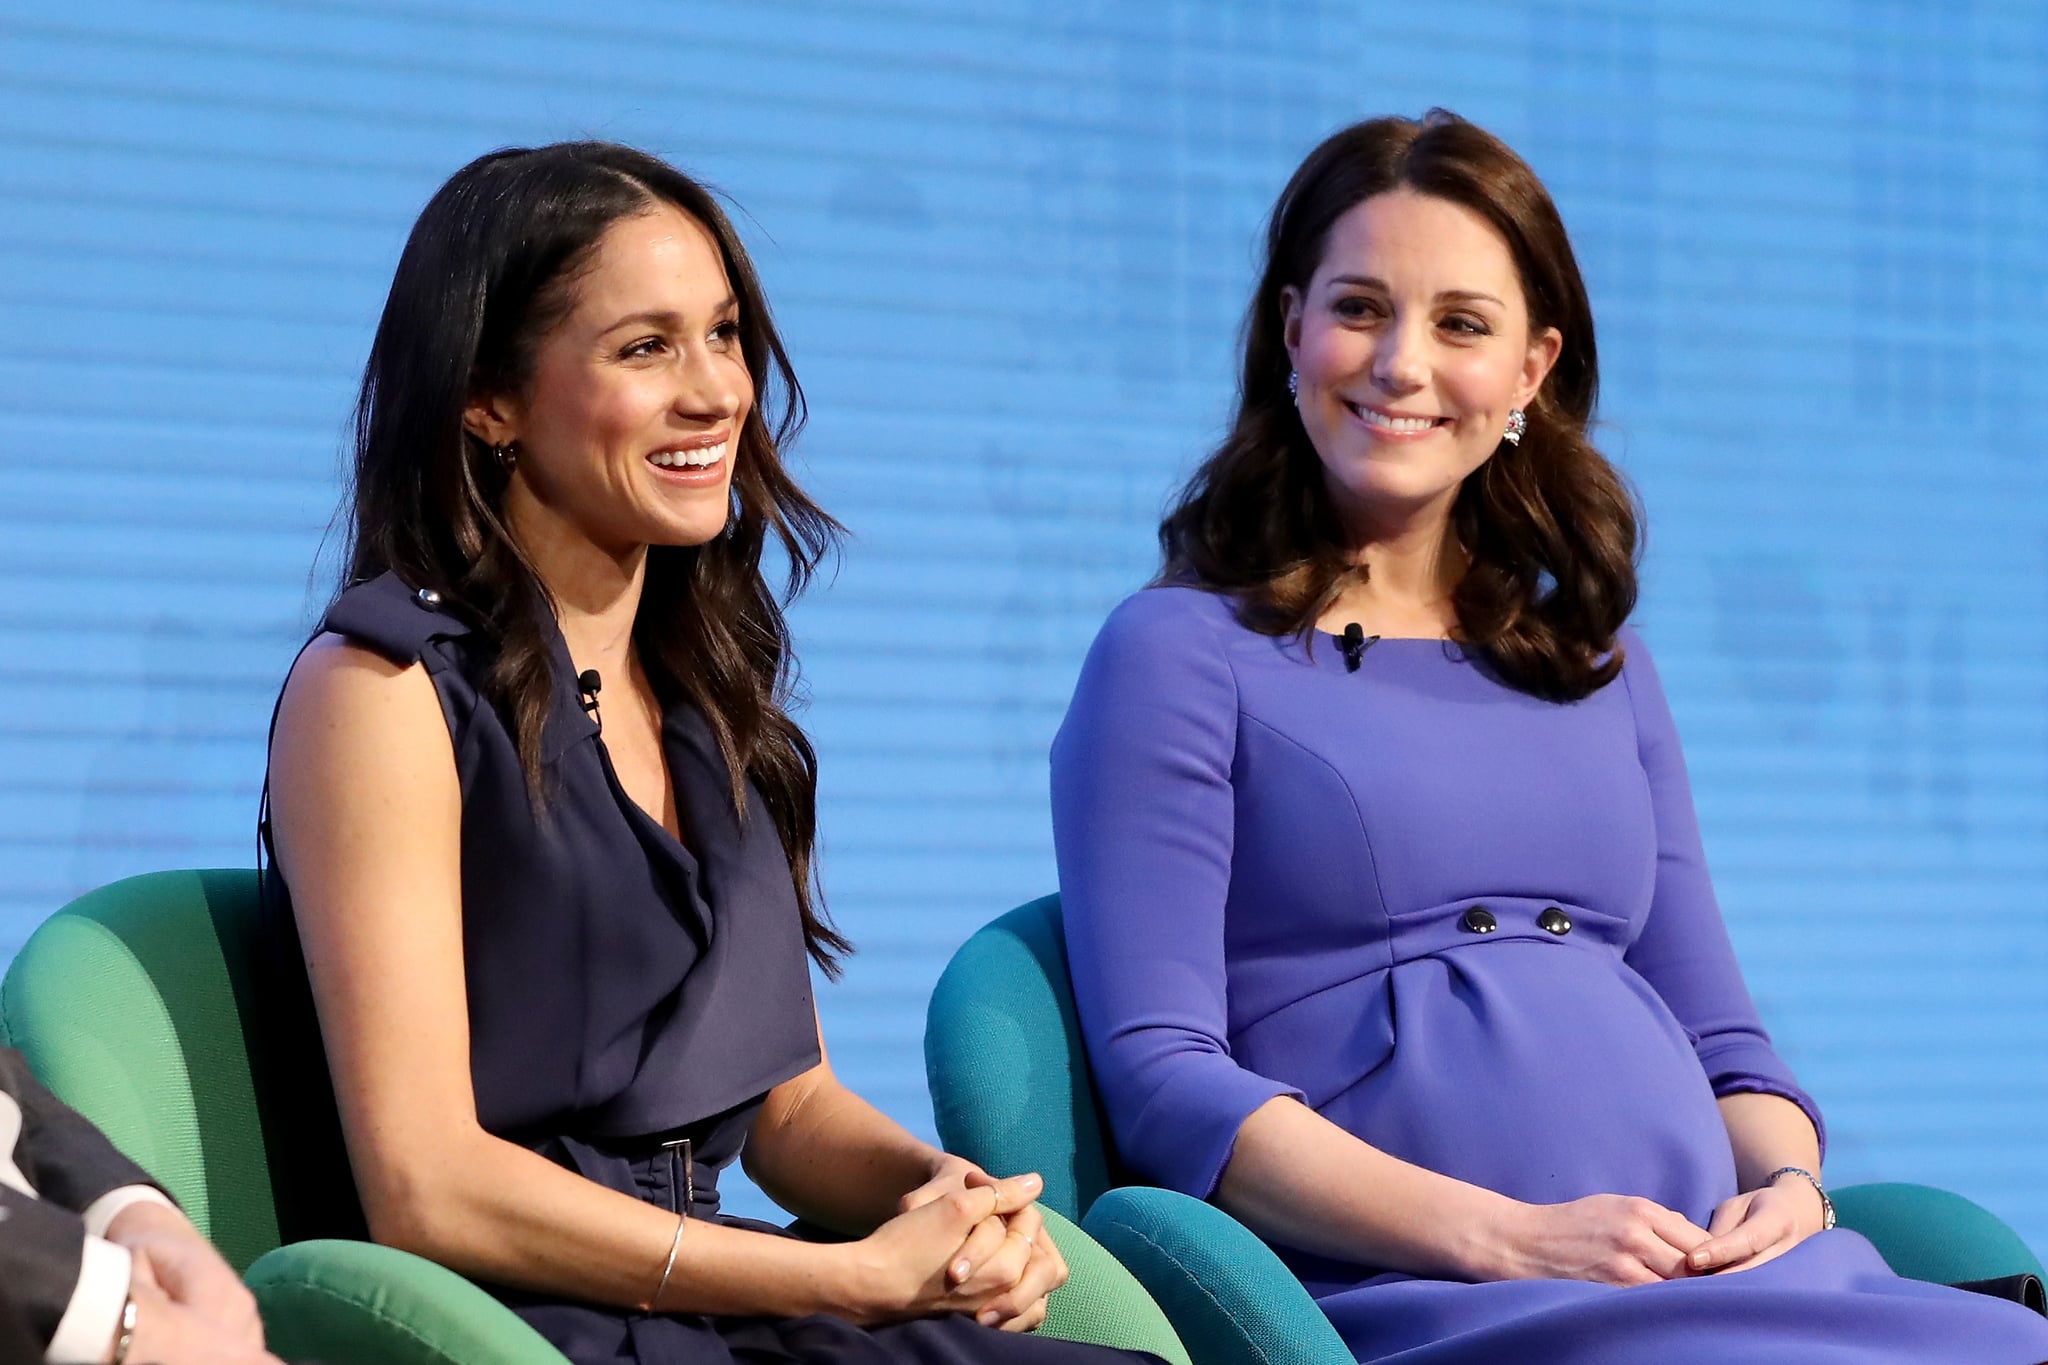 US actress and fiancee of Britain's Prince Harry Meghan Markle (L) and Britain's Catherine (L), Duchess of Cambridge attend the first annual Royal Foundation Forum on February 28, 2018 in London. / AFP PHOTO / POOL / Chris Jackson        (Photo credit should read CHRIS JACKSON/AFP/Getty Images)